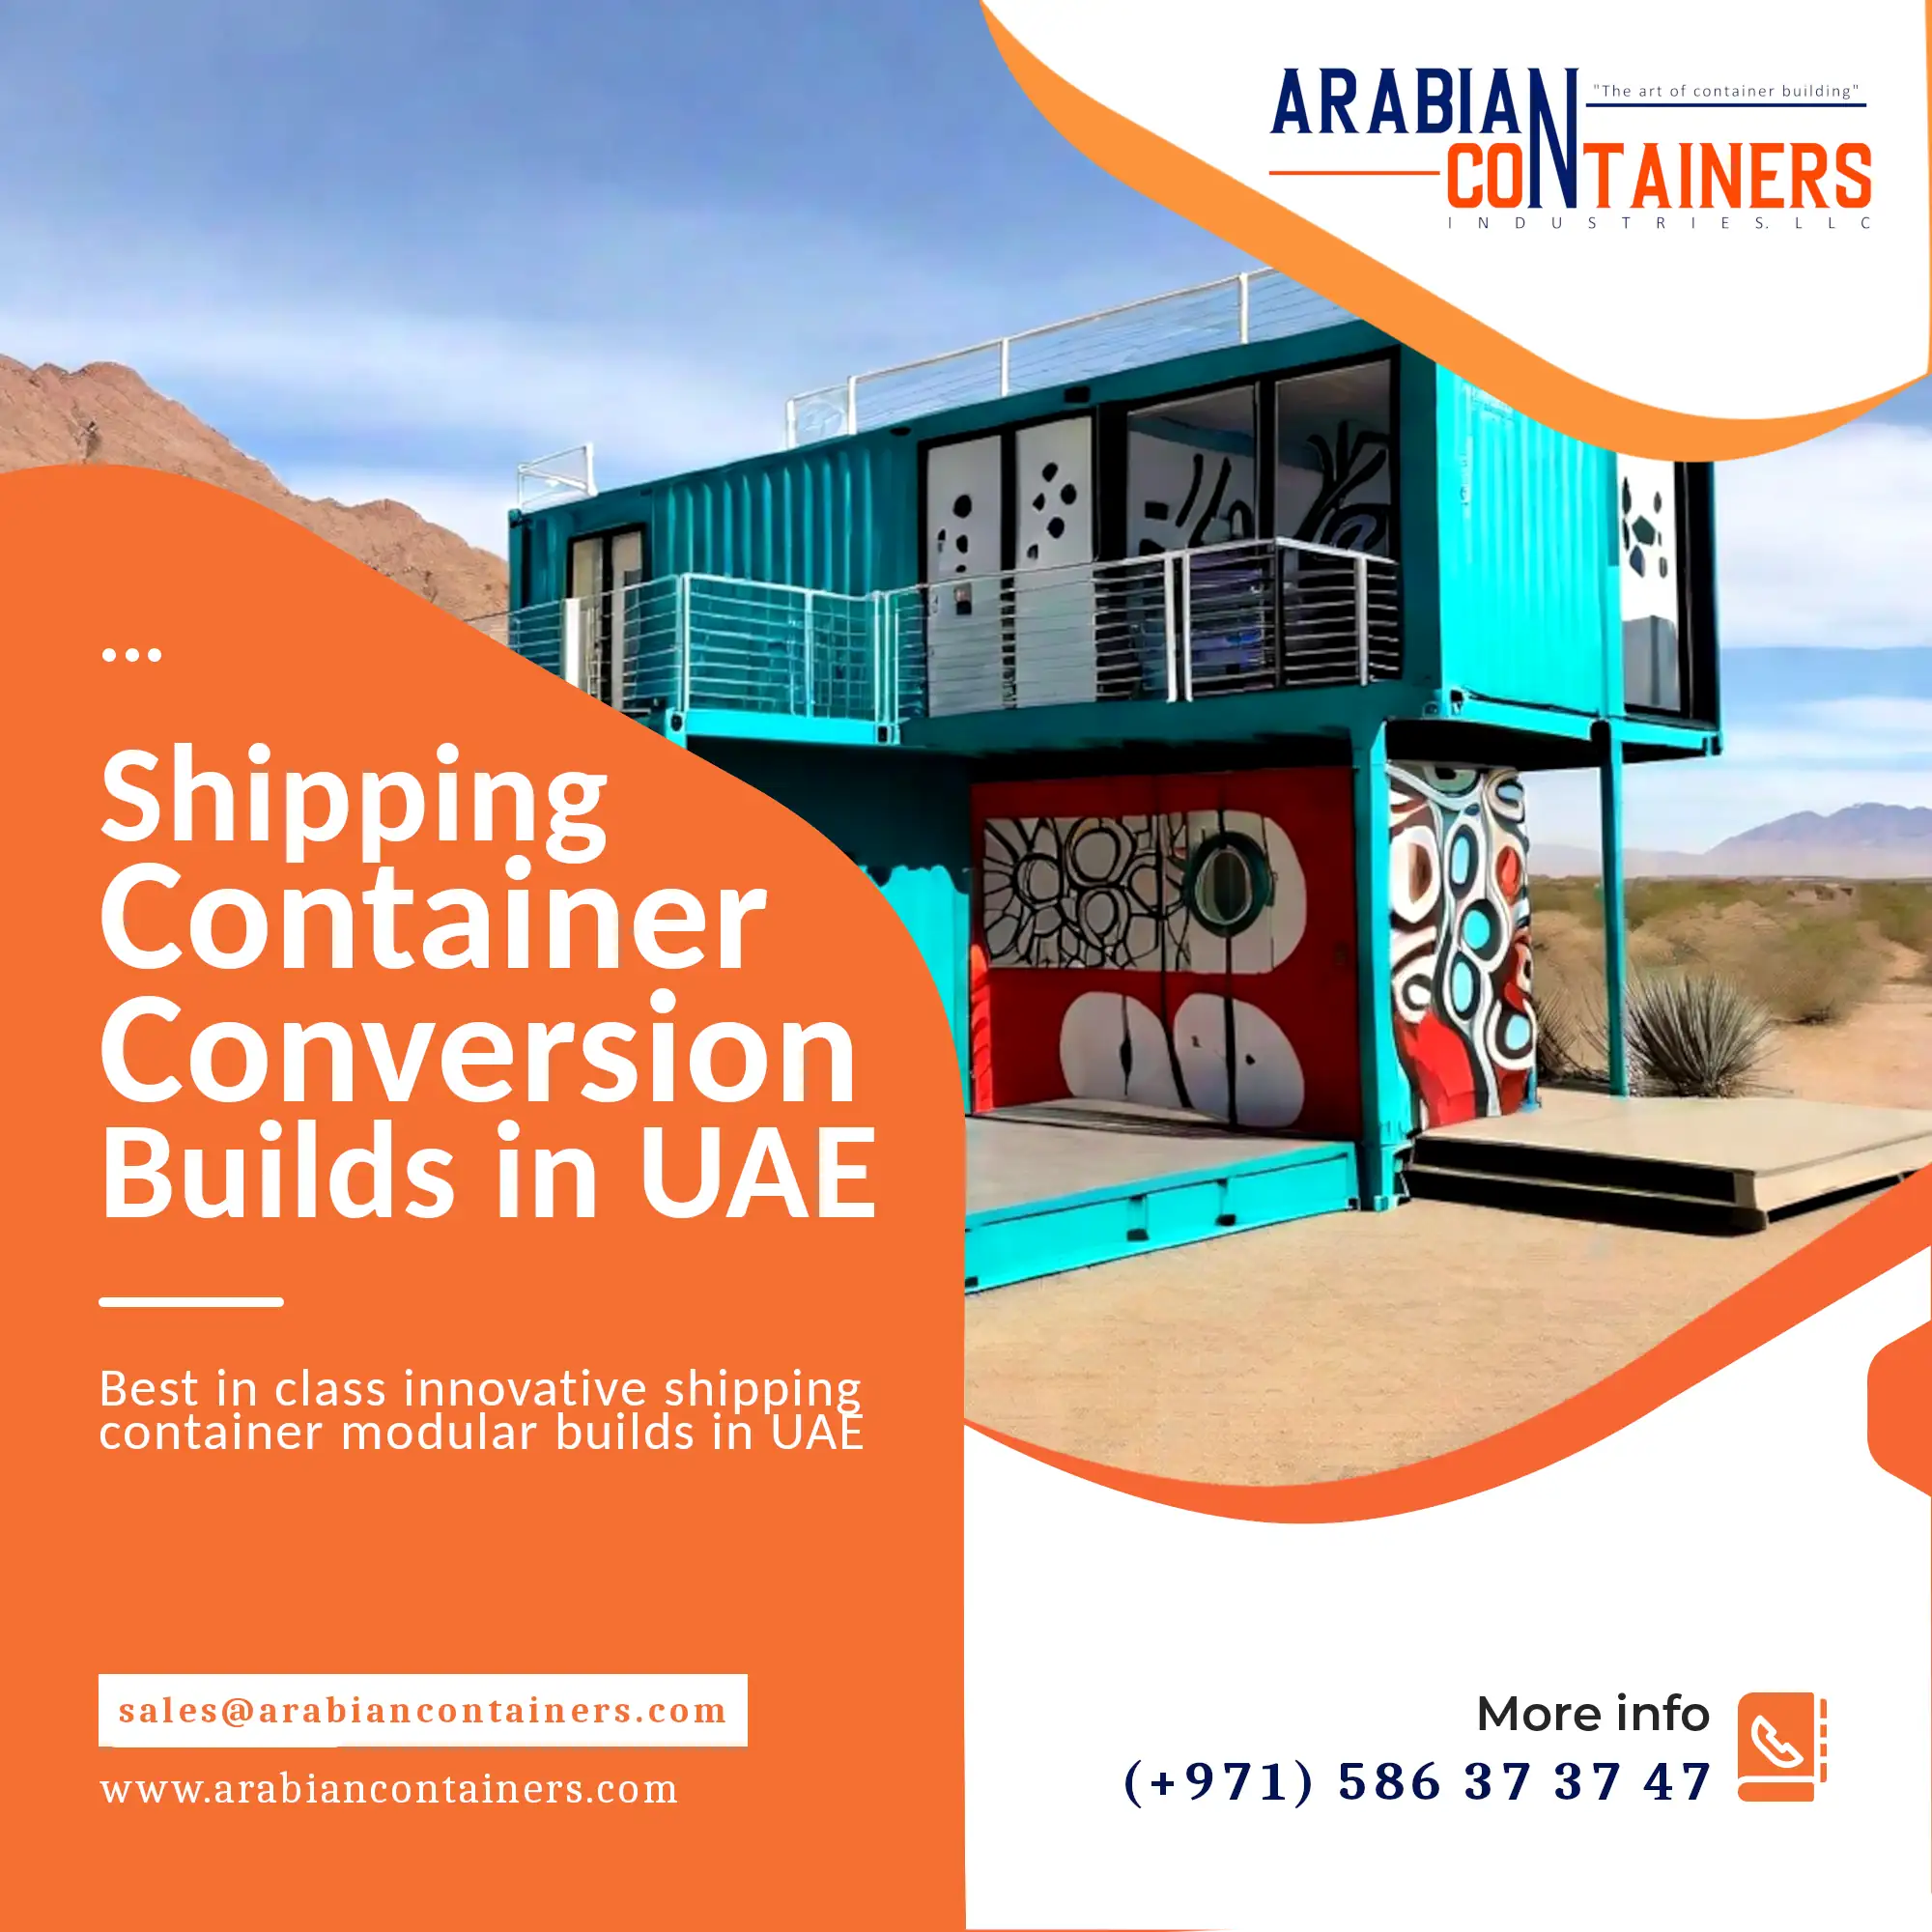 Shipping container conversion company in UAE.